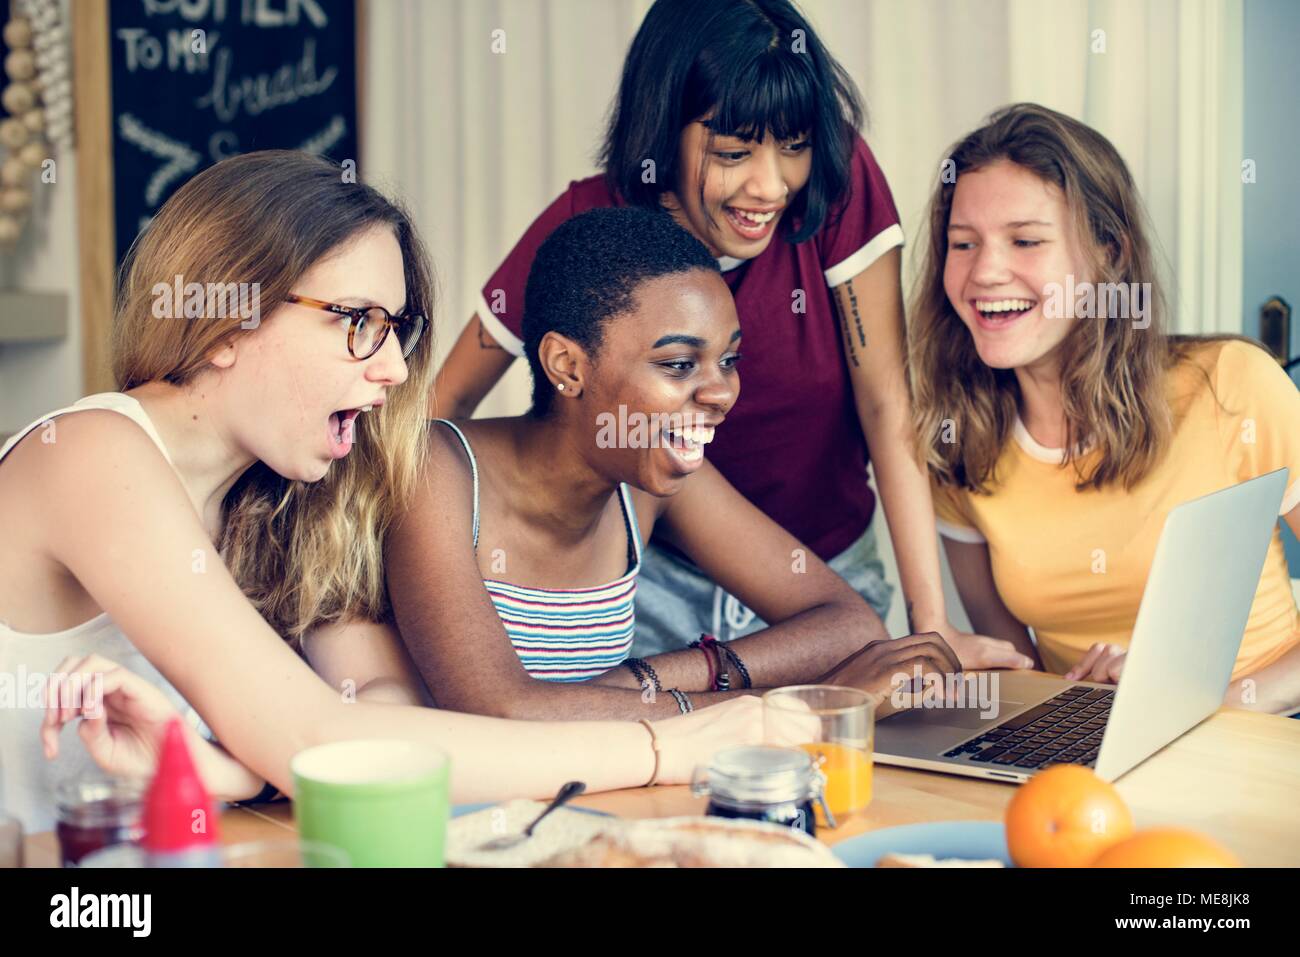 Group of diverse friends looking at computer laptop with surprise face expression Stock Photo